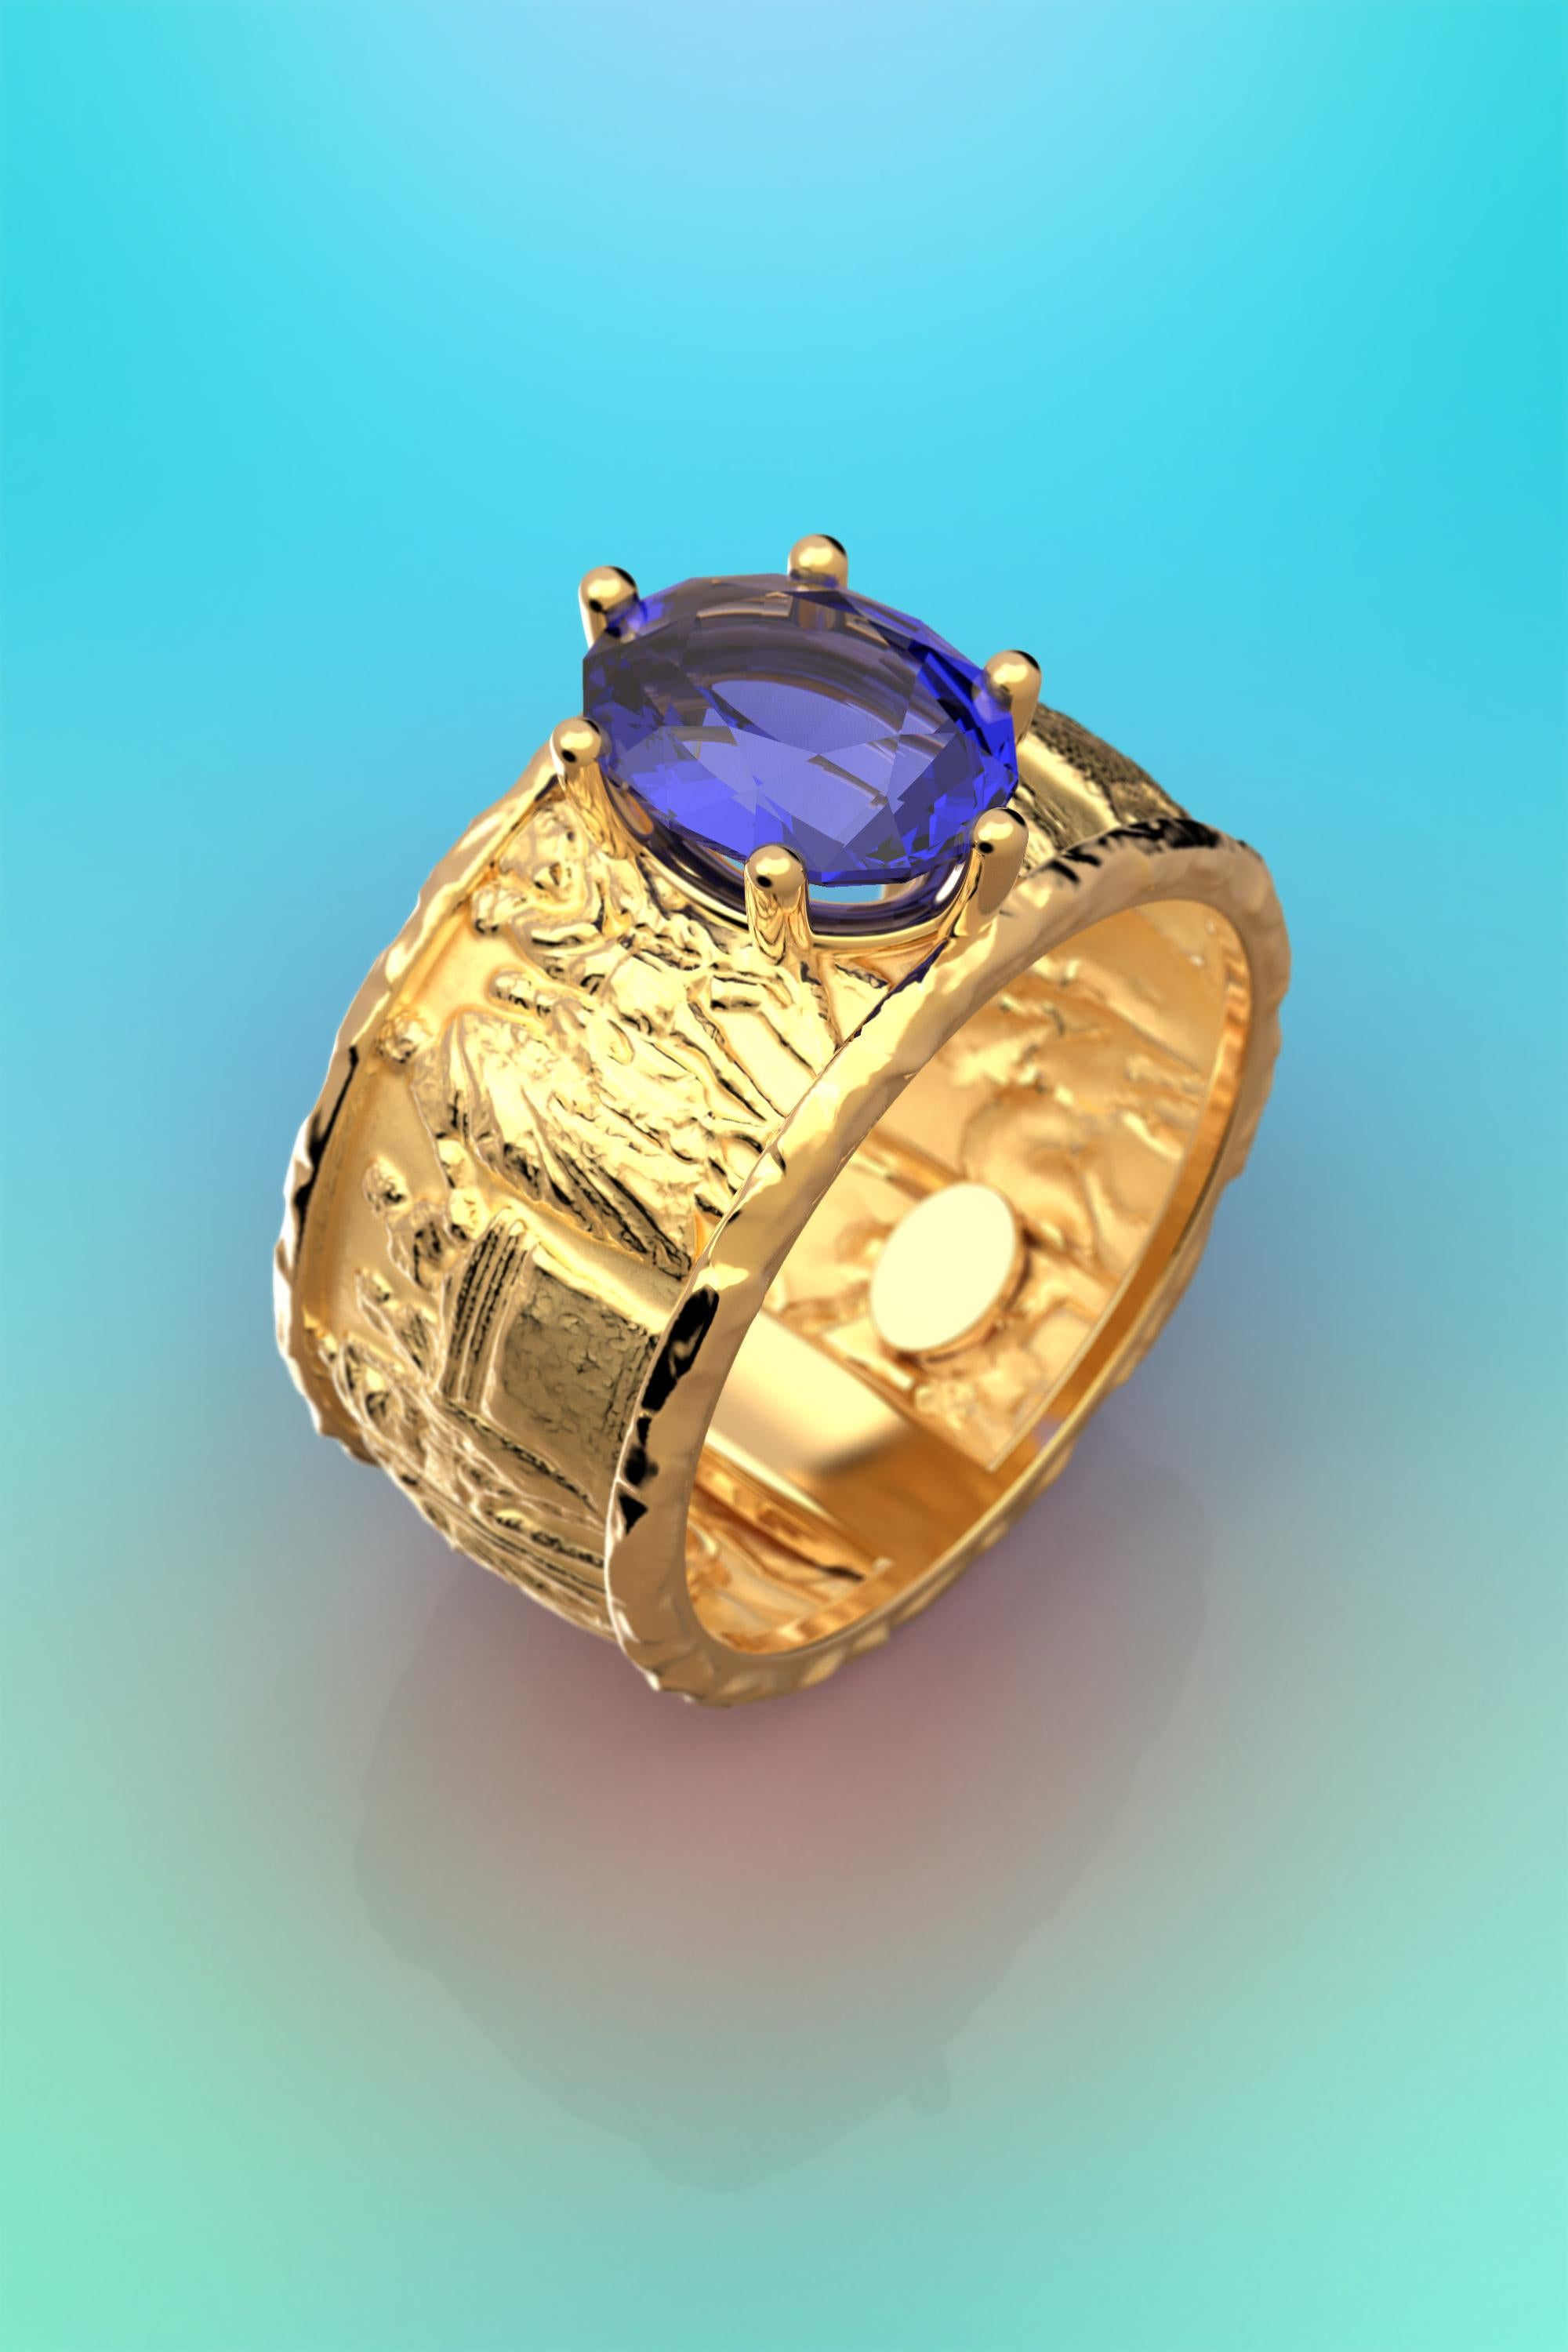 For Sale:  Tanzanite gold ring in 18k solid gold by Oltremare Gioielli made in Italy. 3